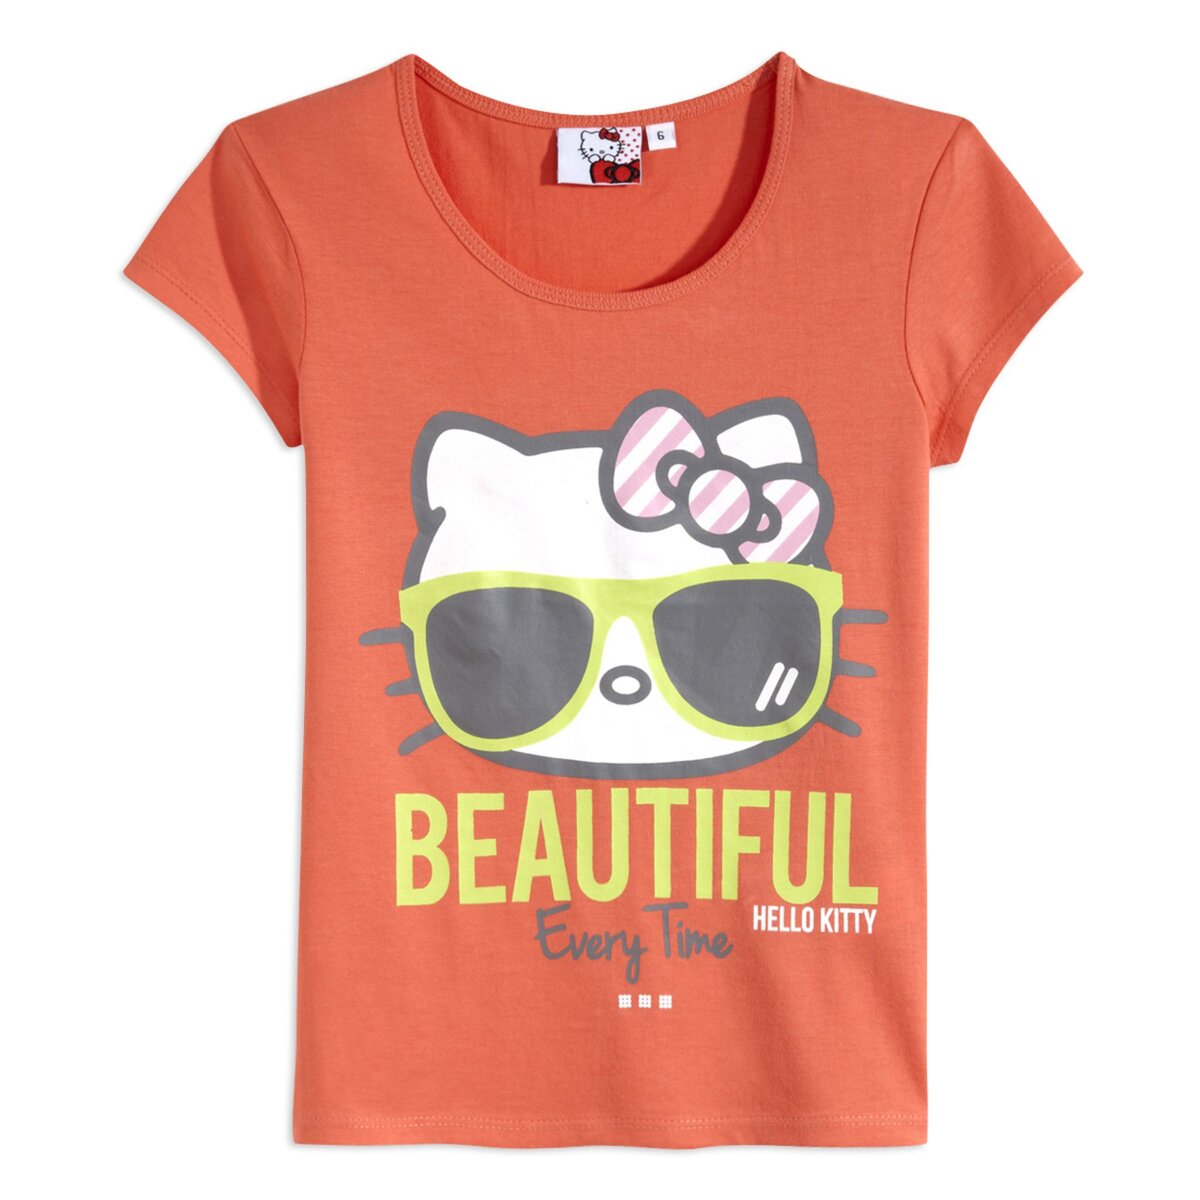 HELLO KITTY Tee-shirt manches courtes fille 